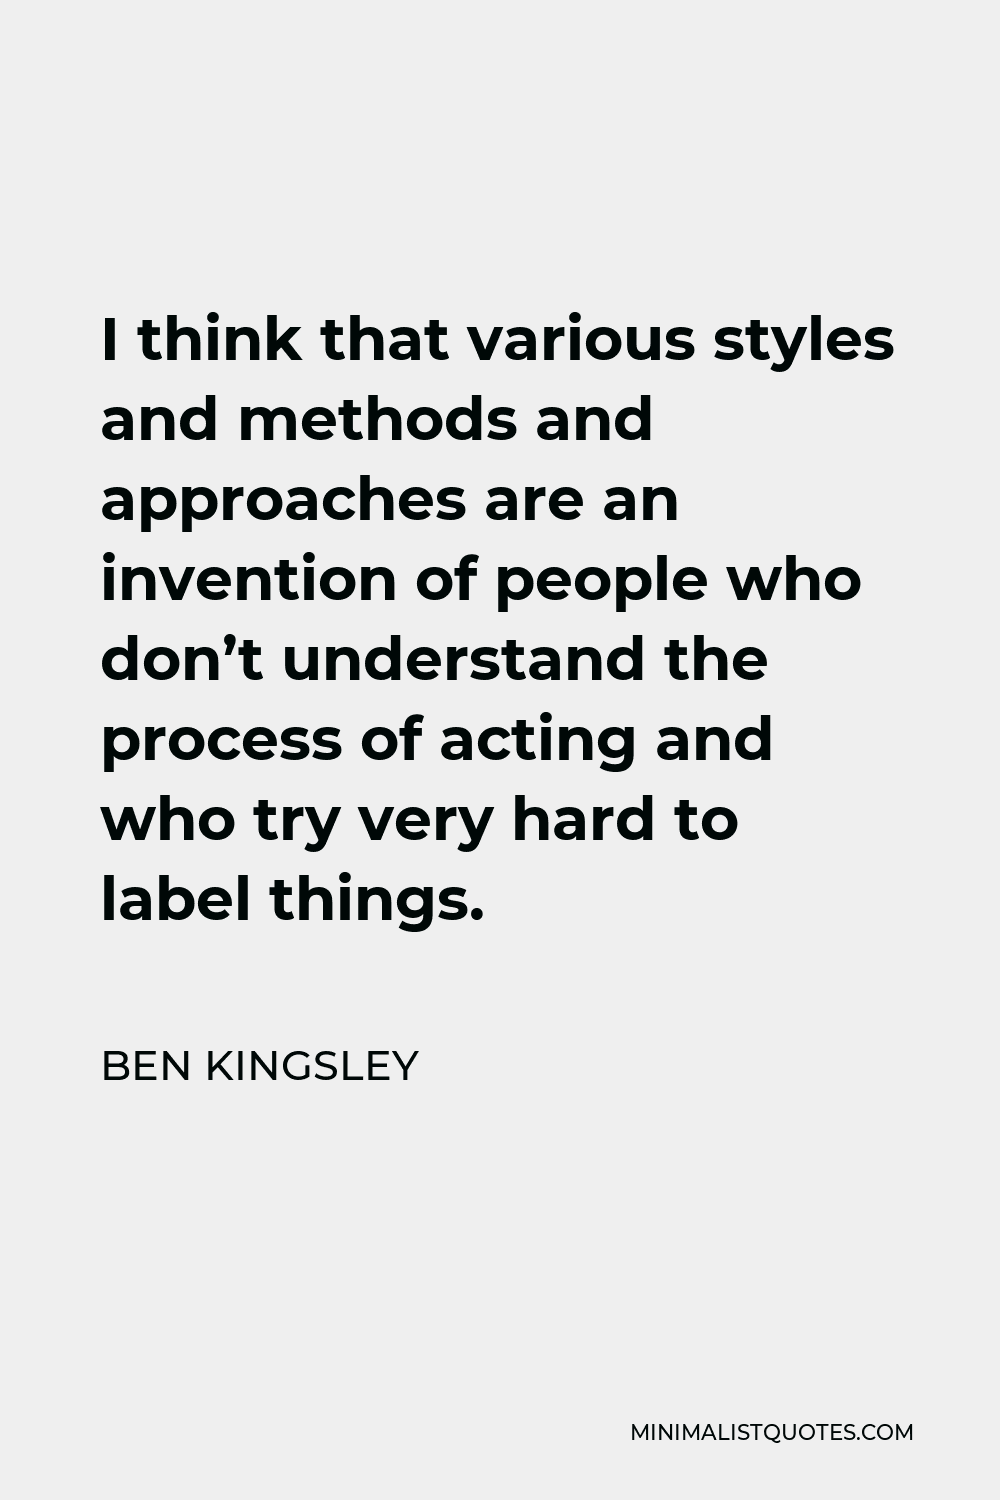 Ben Kingsley Quote - I think that various styles and methods and approaches are an invention of people who don’t understand the process of acting and who try very hard to label things.